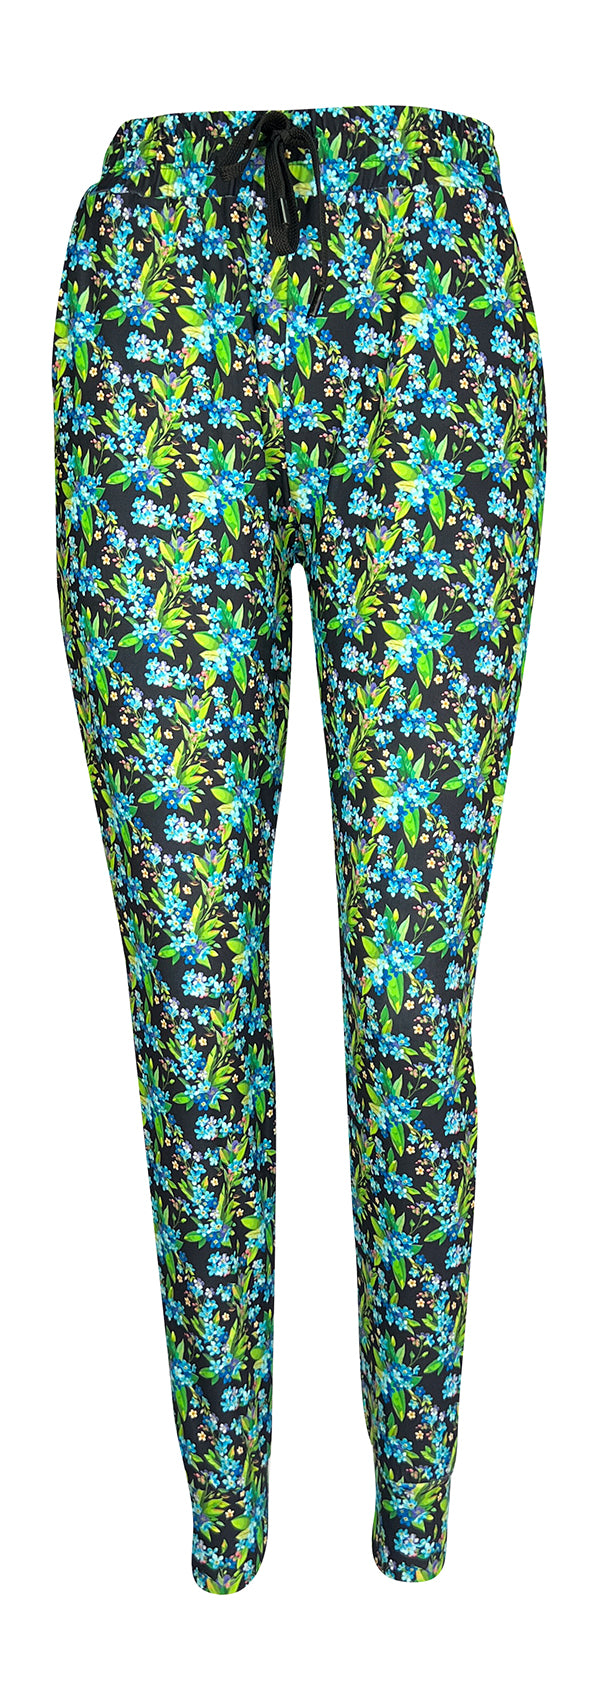 Forget Me Not Lejoggers-Joggers